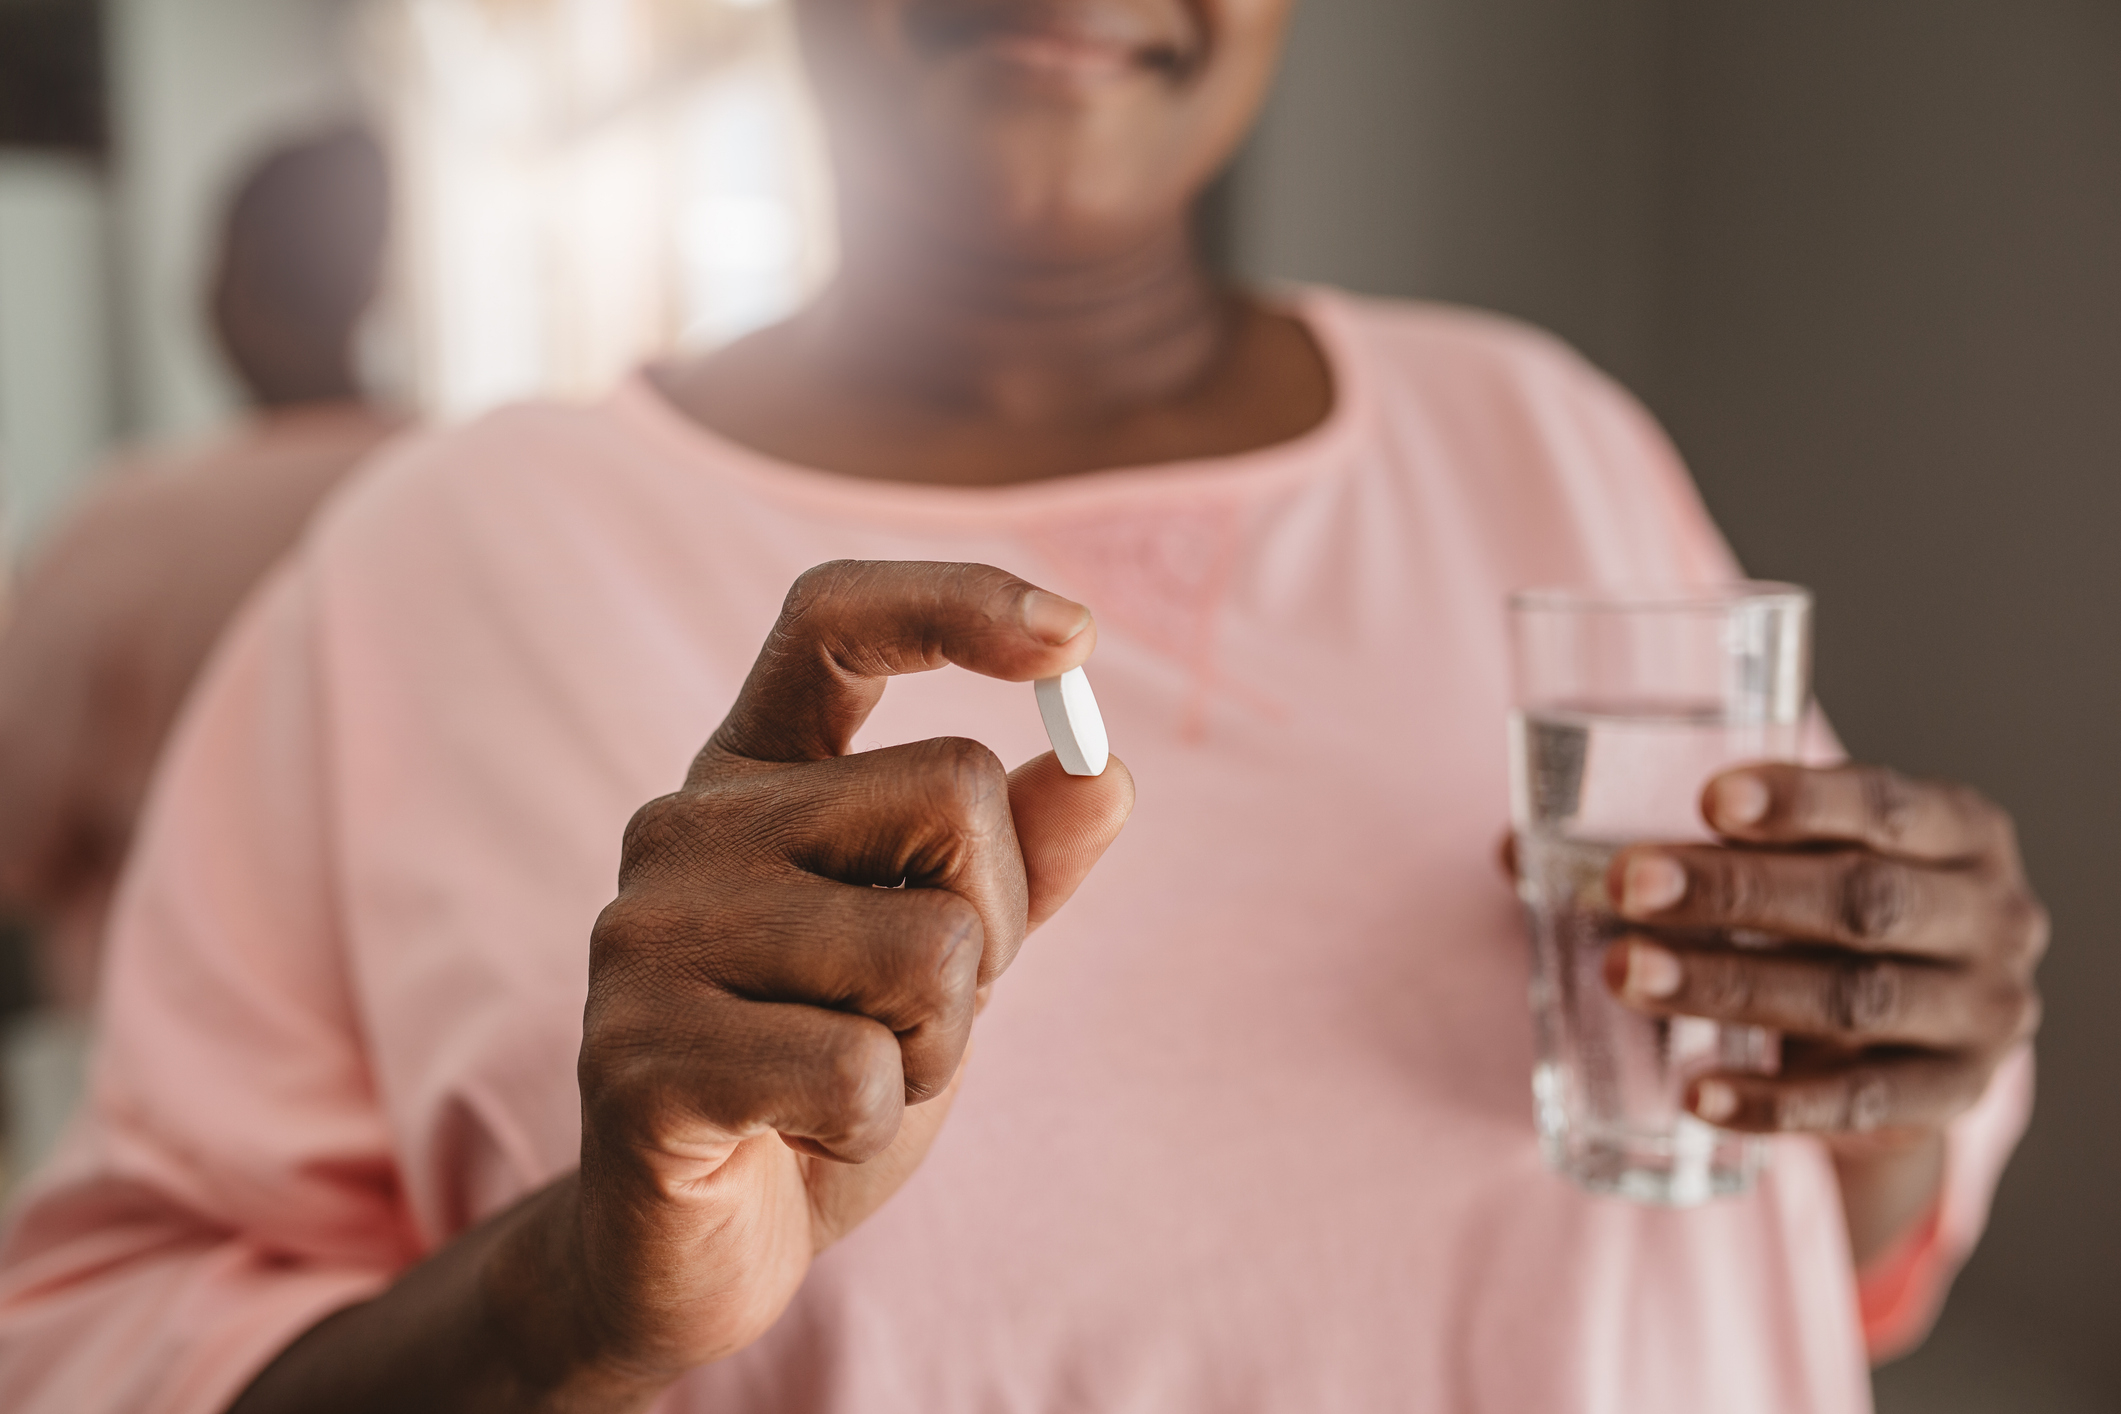 A person holding a pill in one hand and a glass of water in the other, ready to take the medication